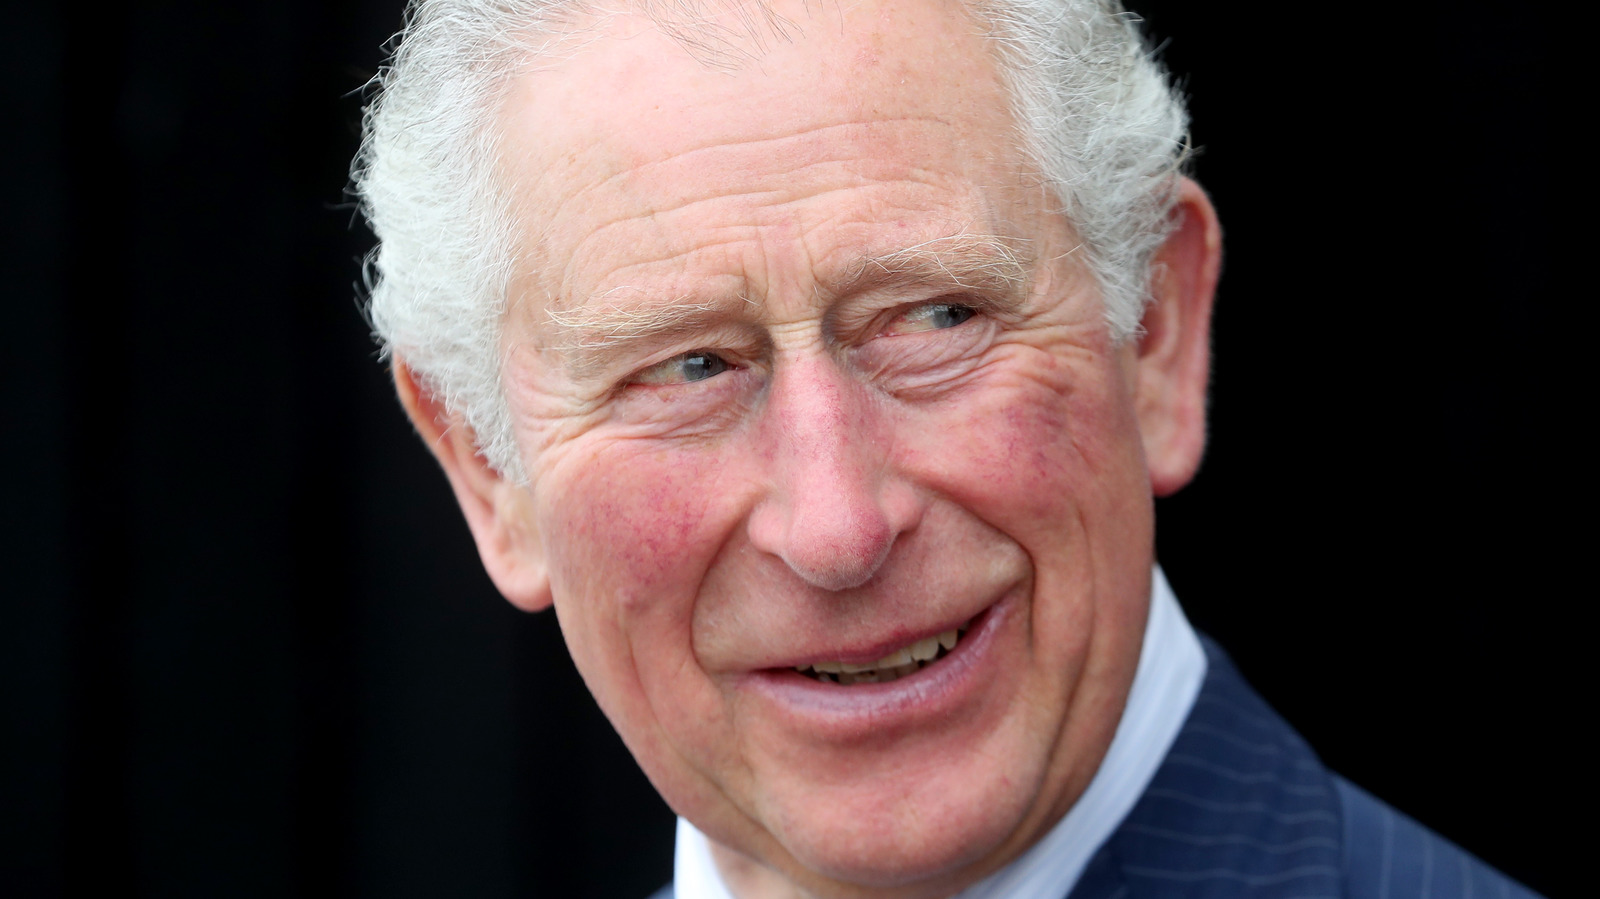 princes charles was just asked about harry and meghan heres how he replied